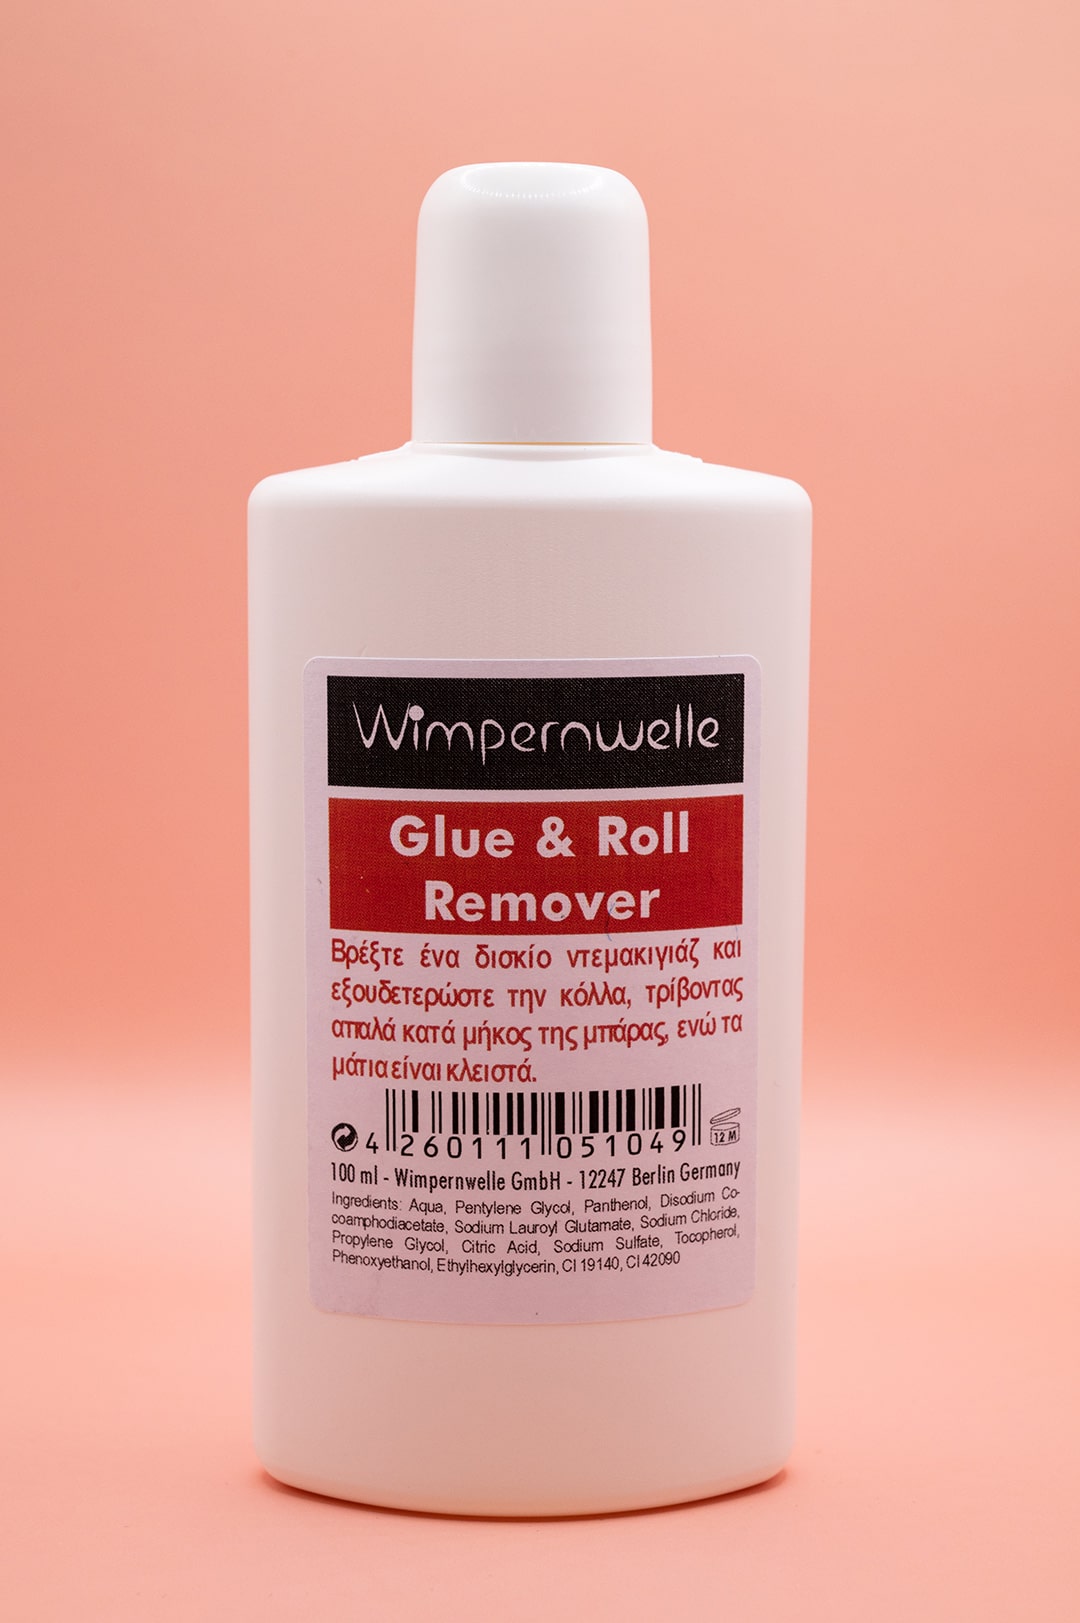 Glue and roll remover solution